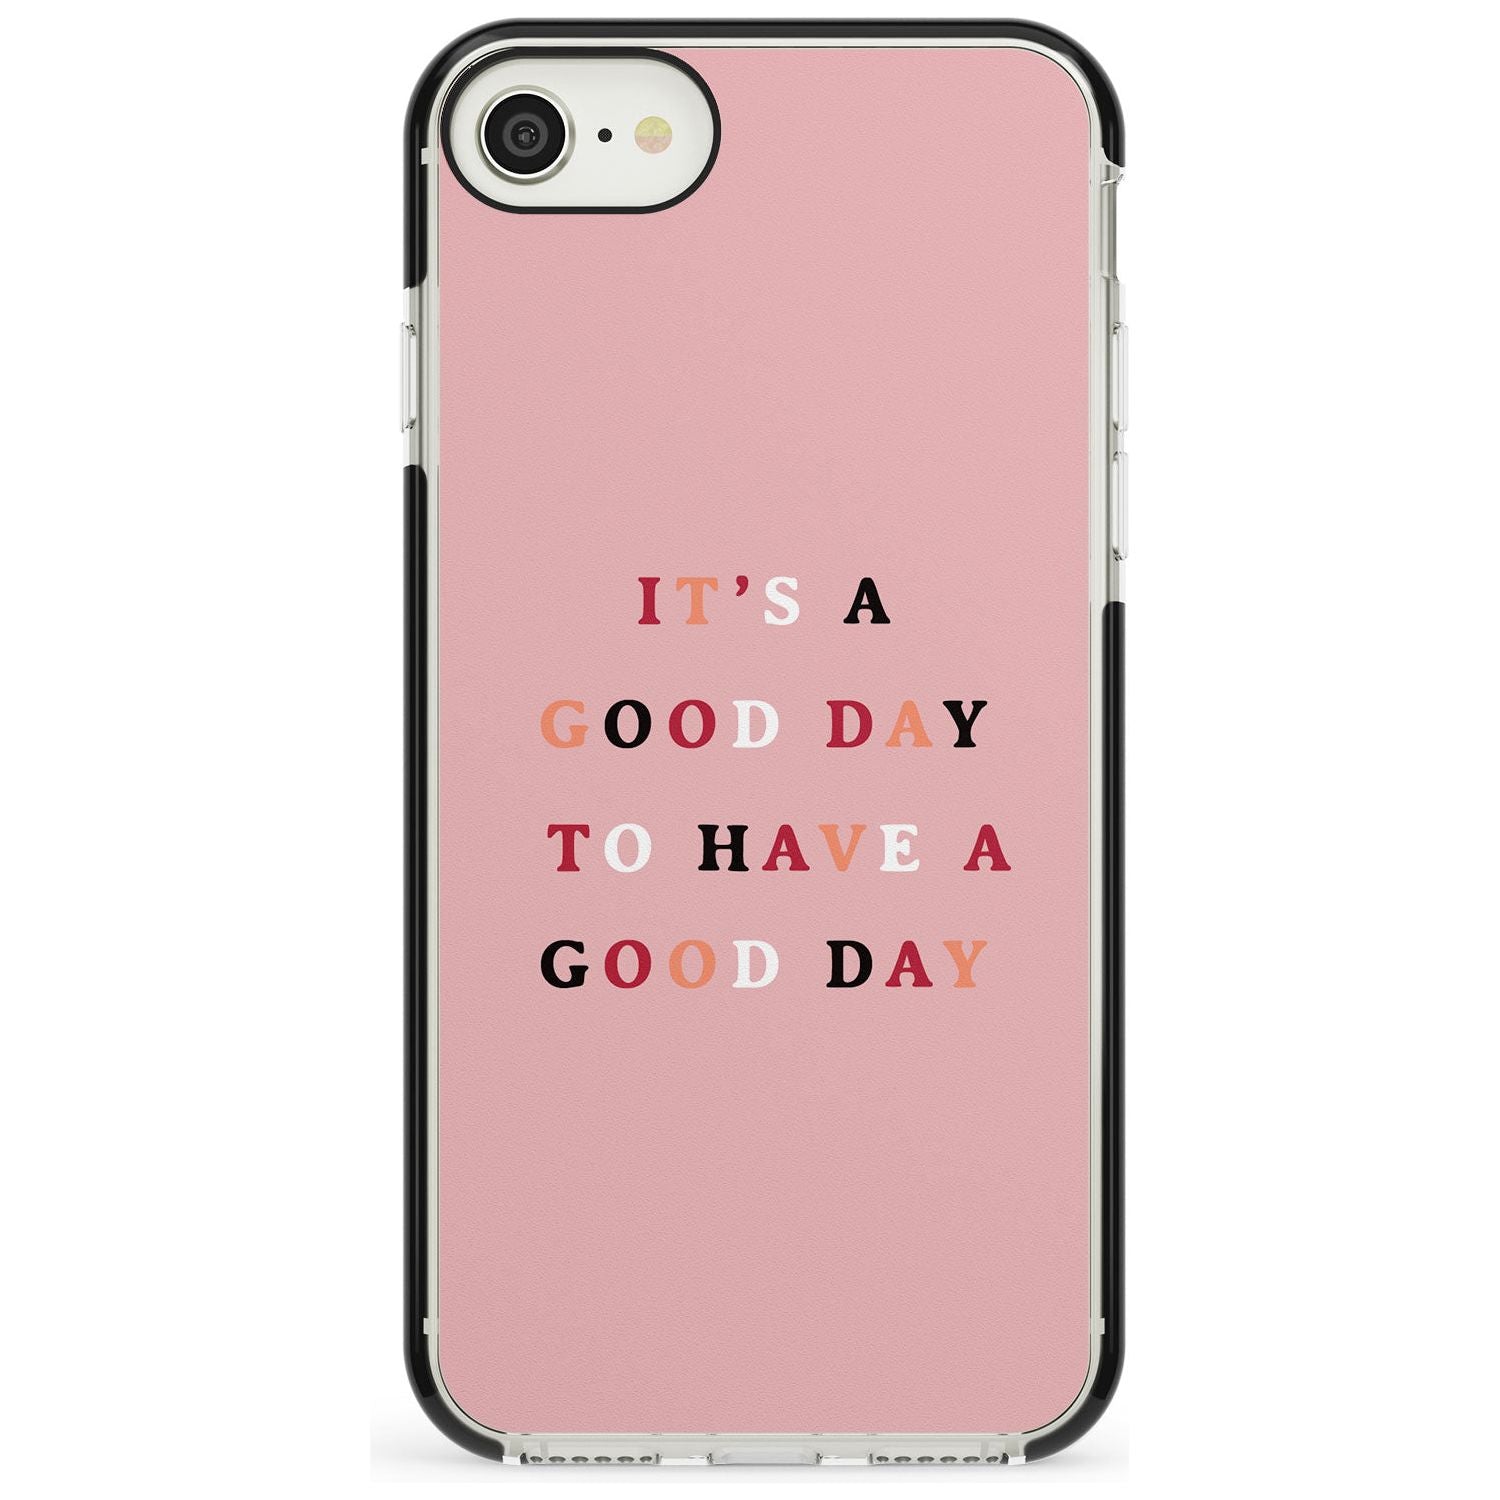 It's a good day to have a good day Black Impact Phone Case for iPhone SE 8 7 Plus